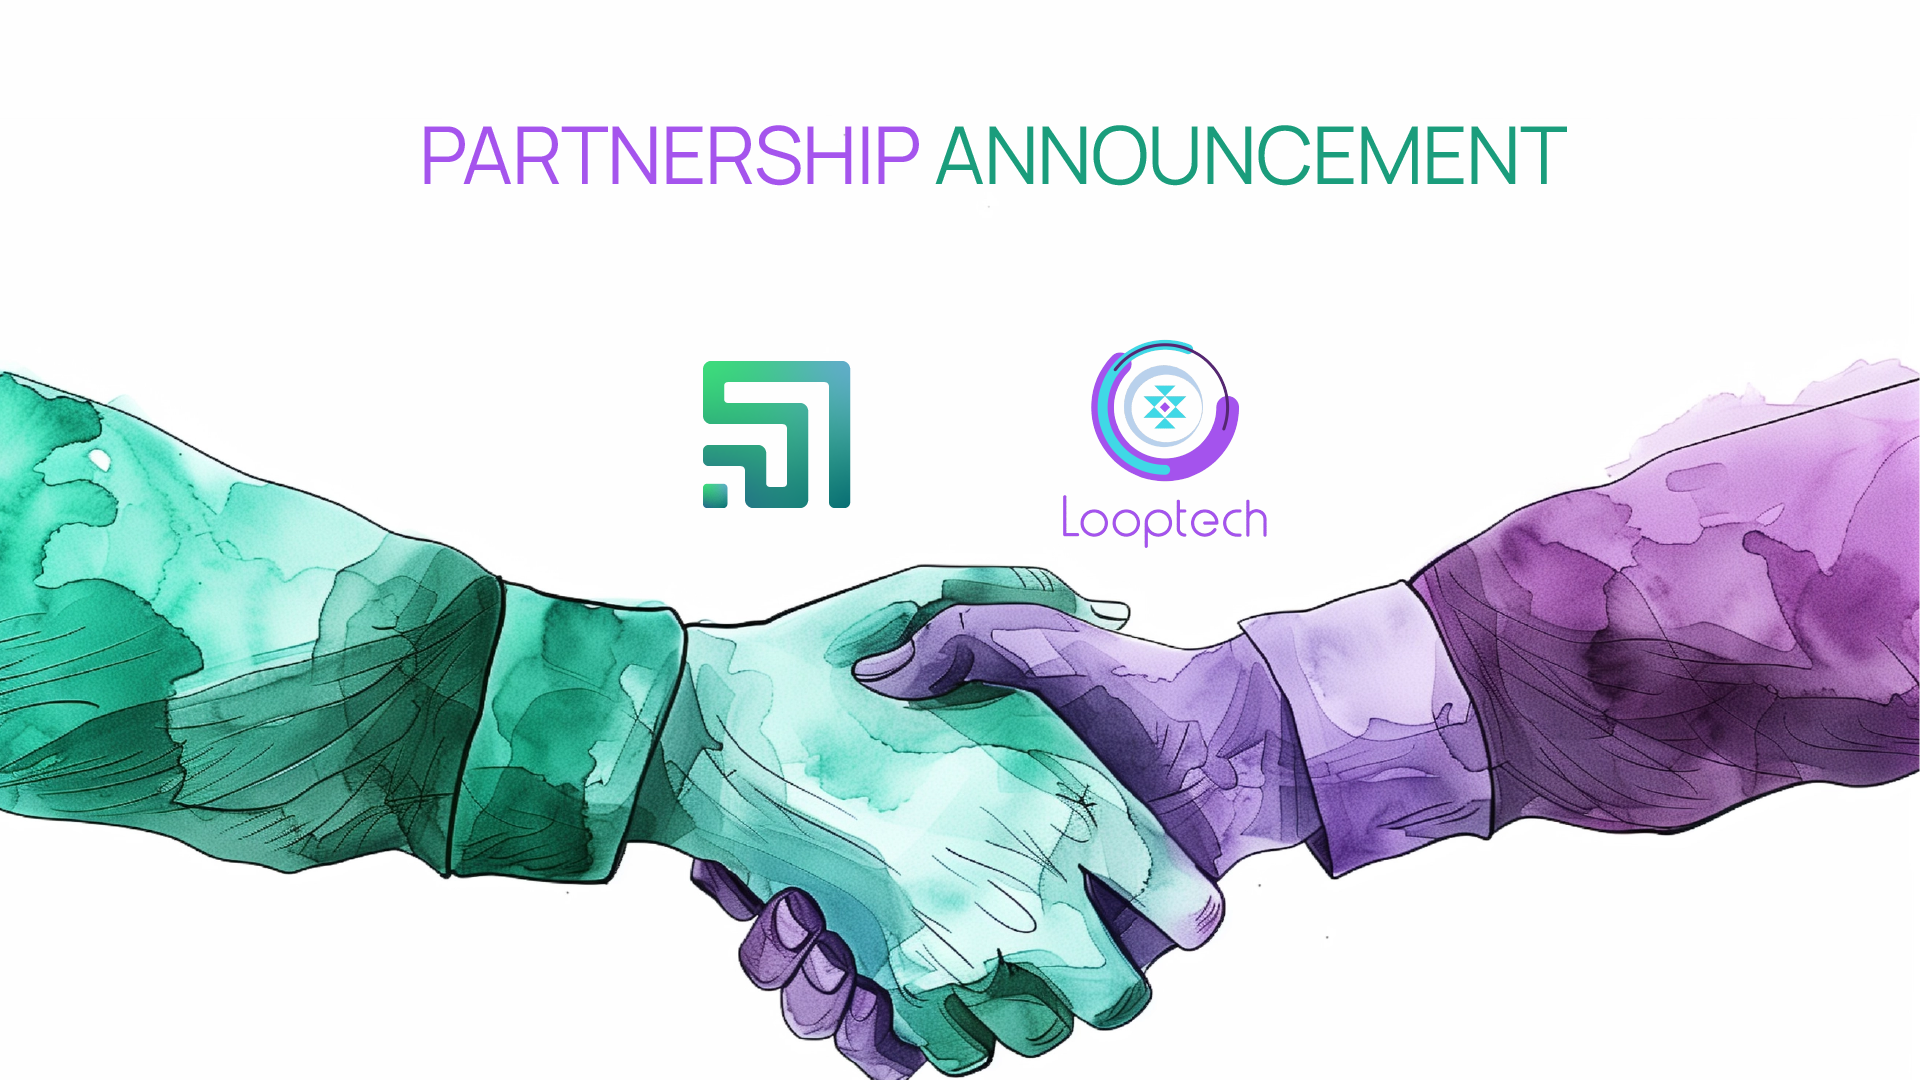 Looptech Becomes Labyrinth’s VAD Partner for Middle East